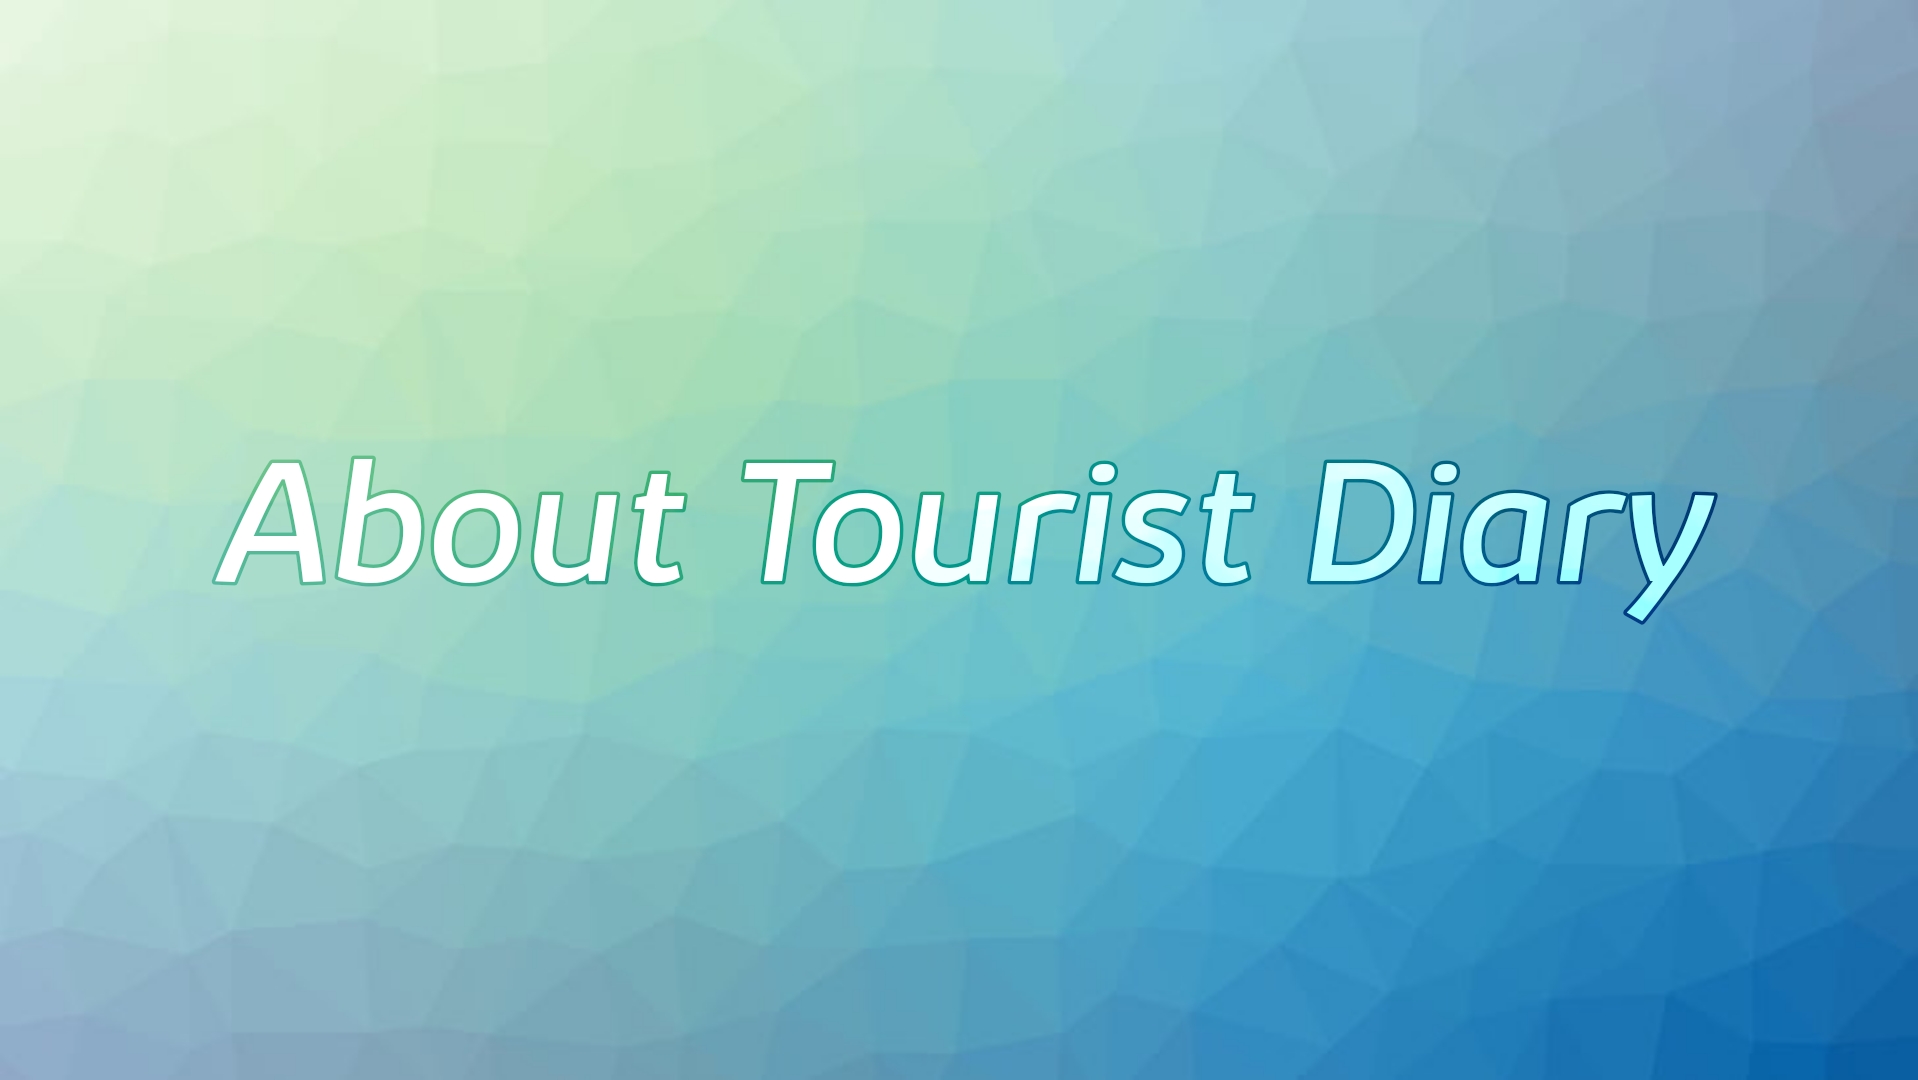 About Tourist Diary